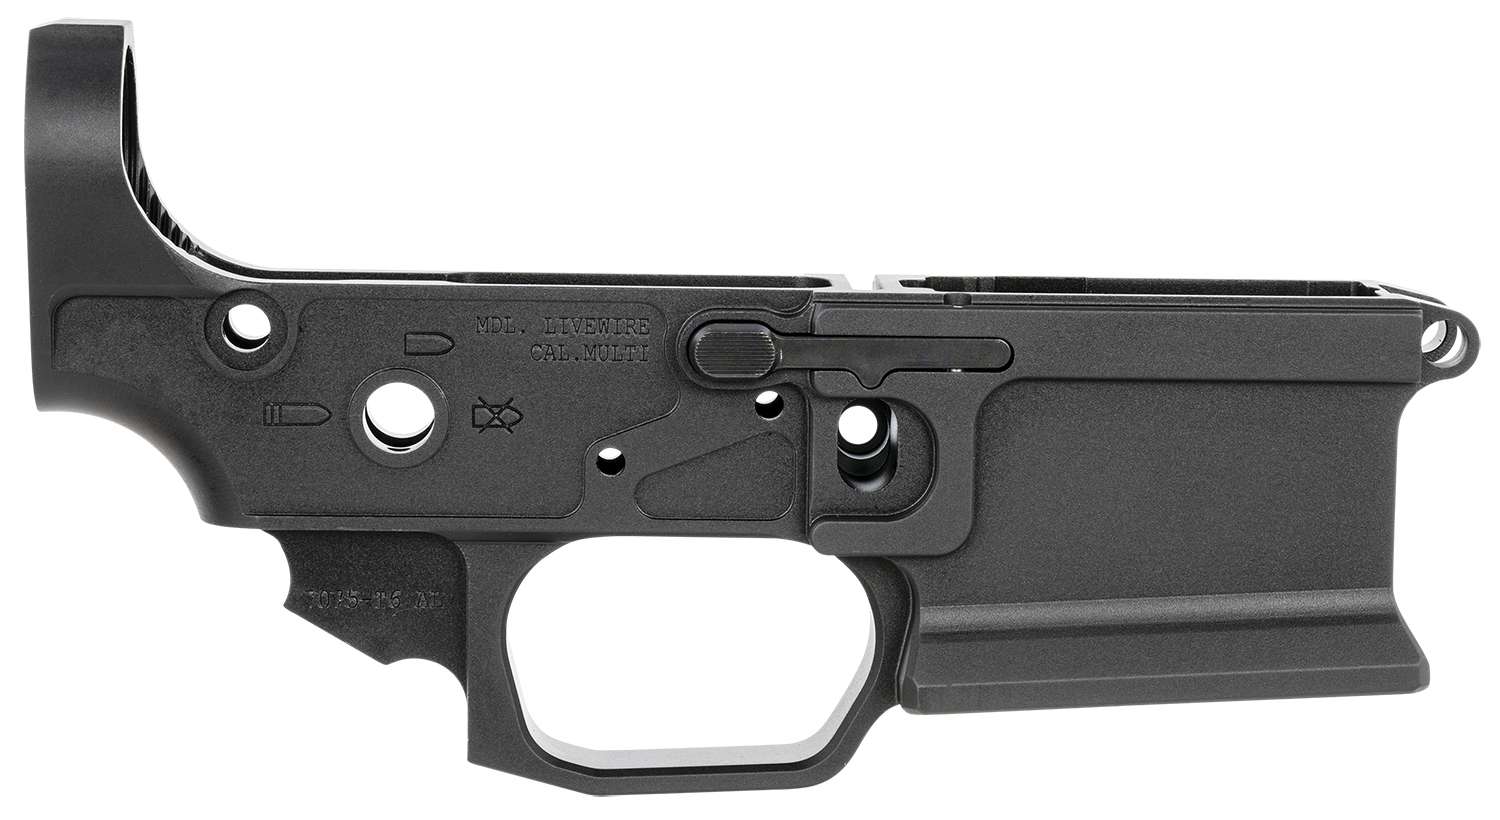 SHARPS LIVEWIRE FORGED LOWER